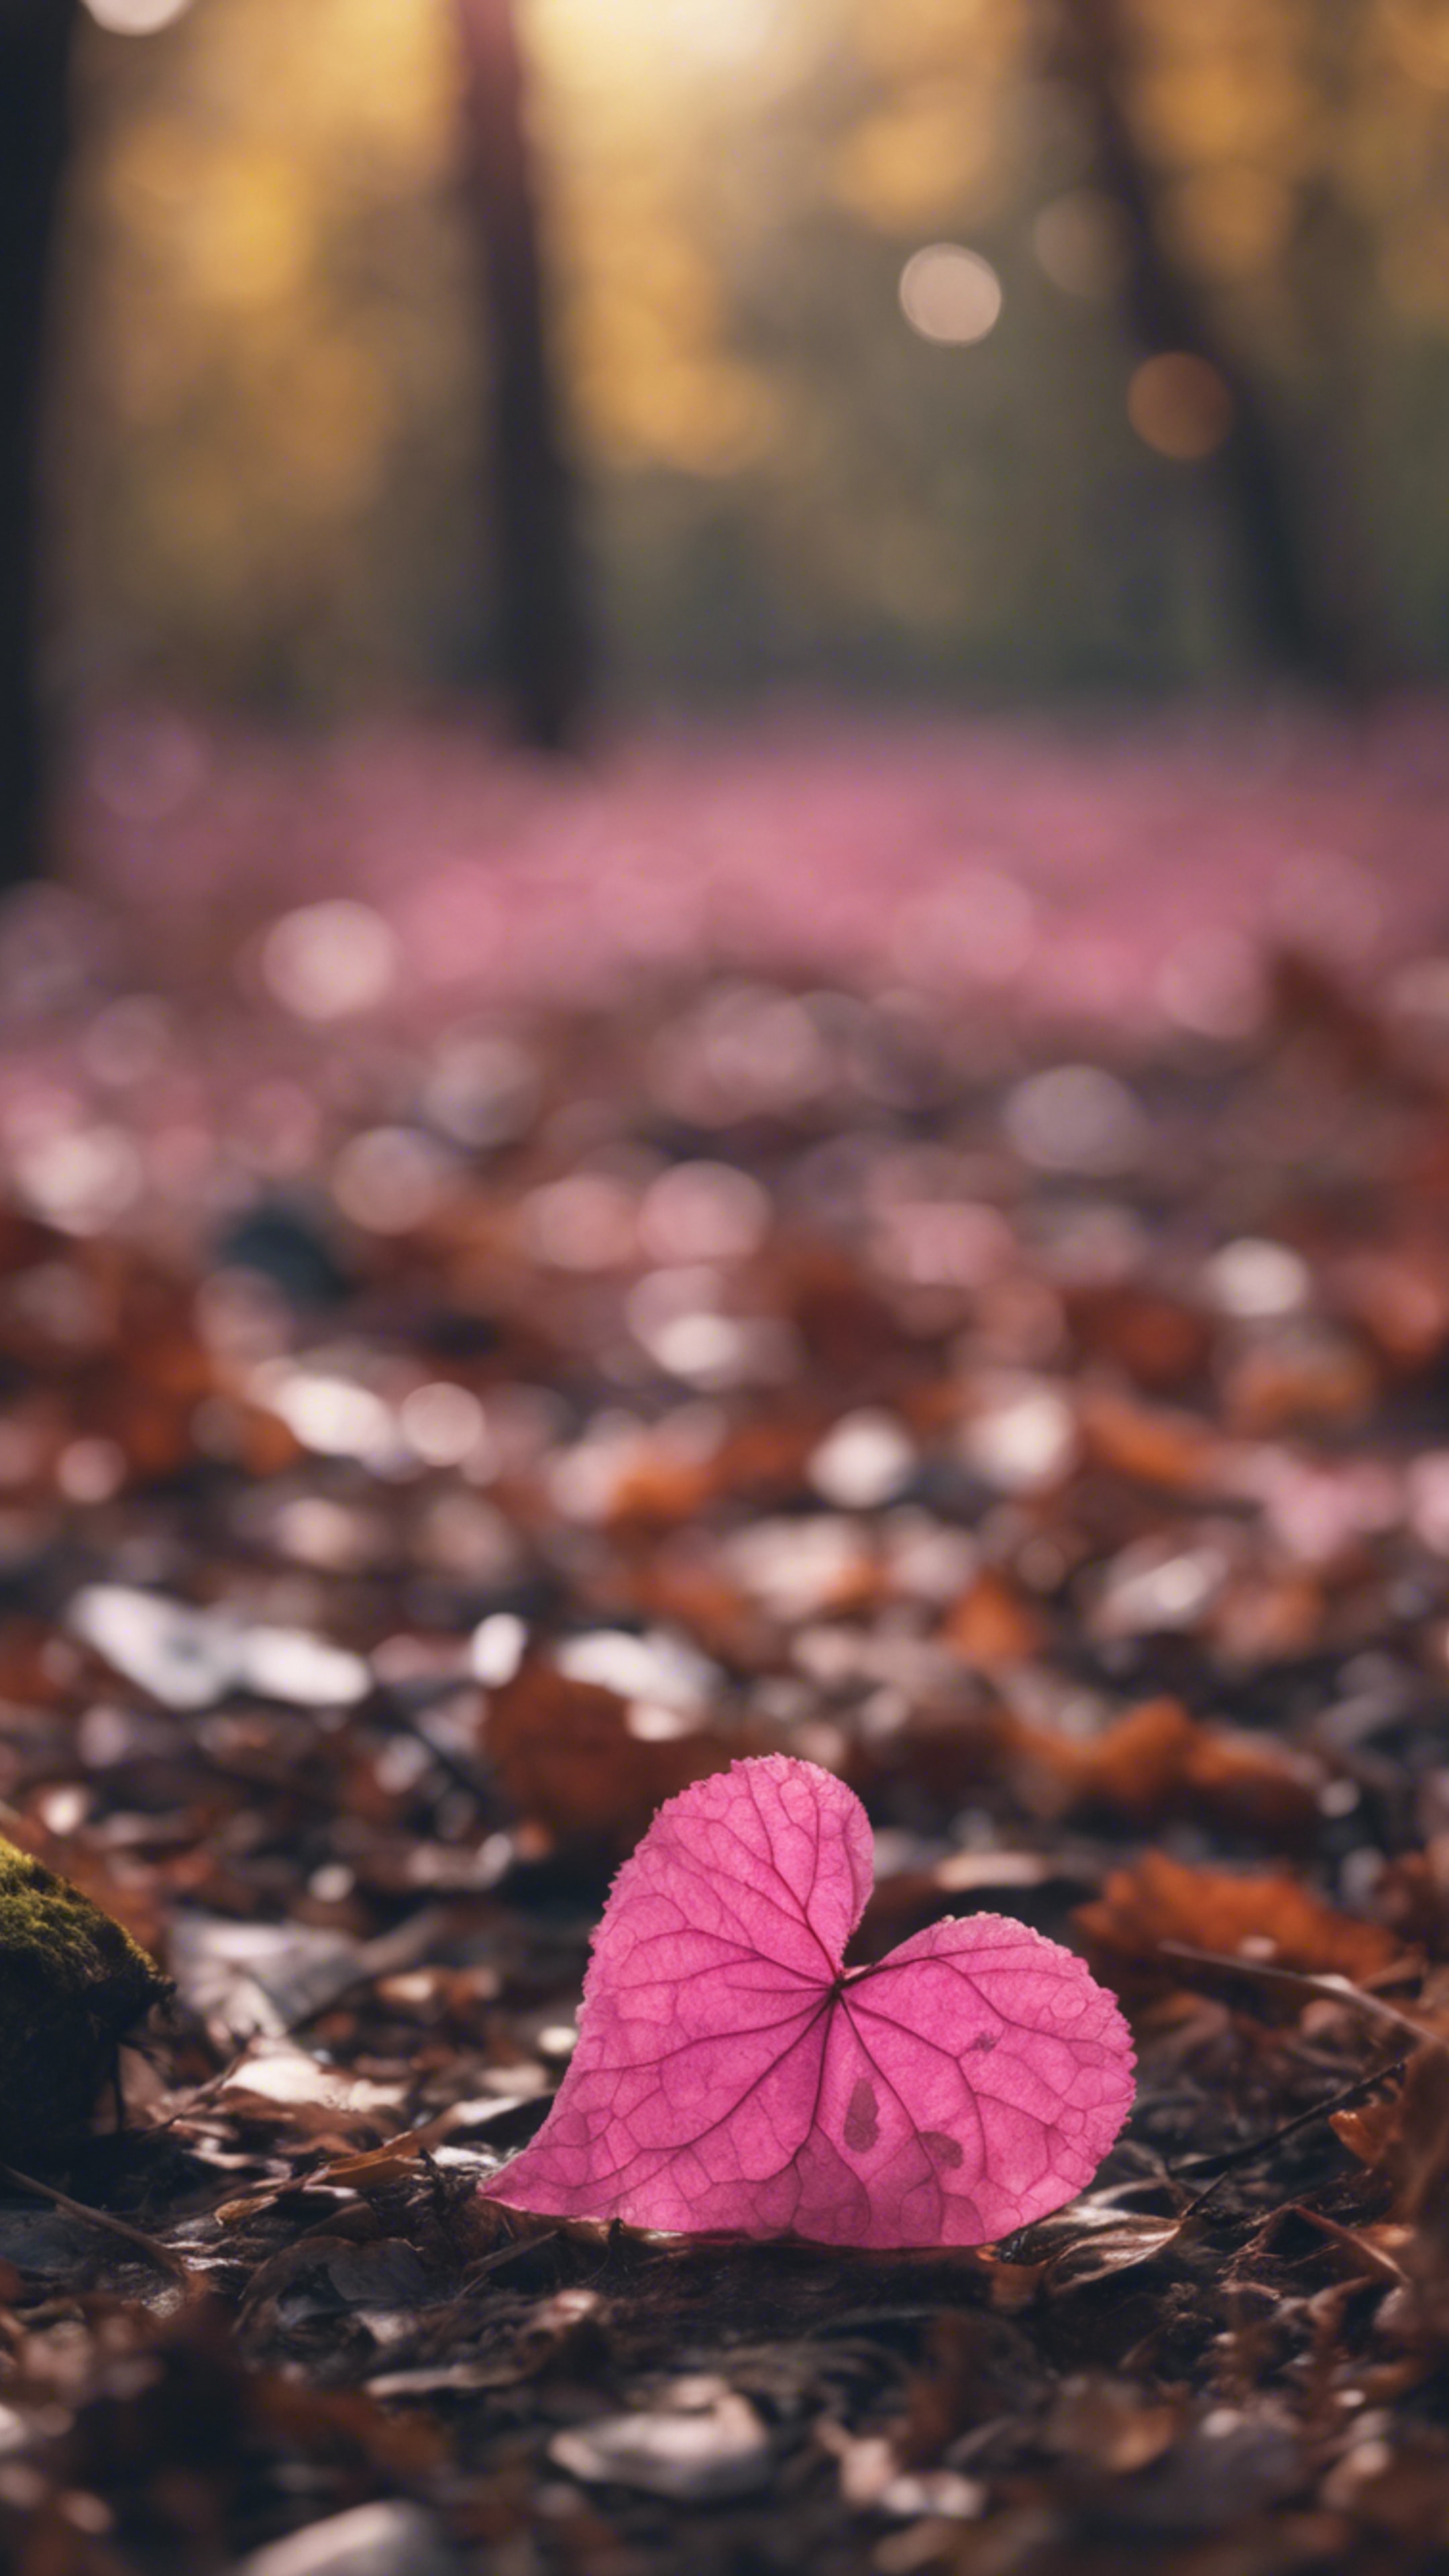 A lonely pink heart-shaped leaf fallen on the forest floor. Wallpaper[094e2266ff00495d8fee]